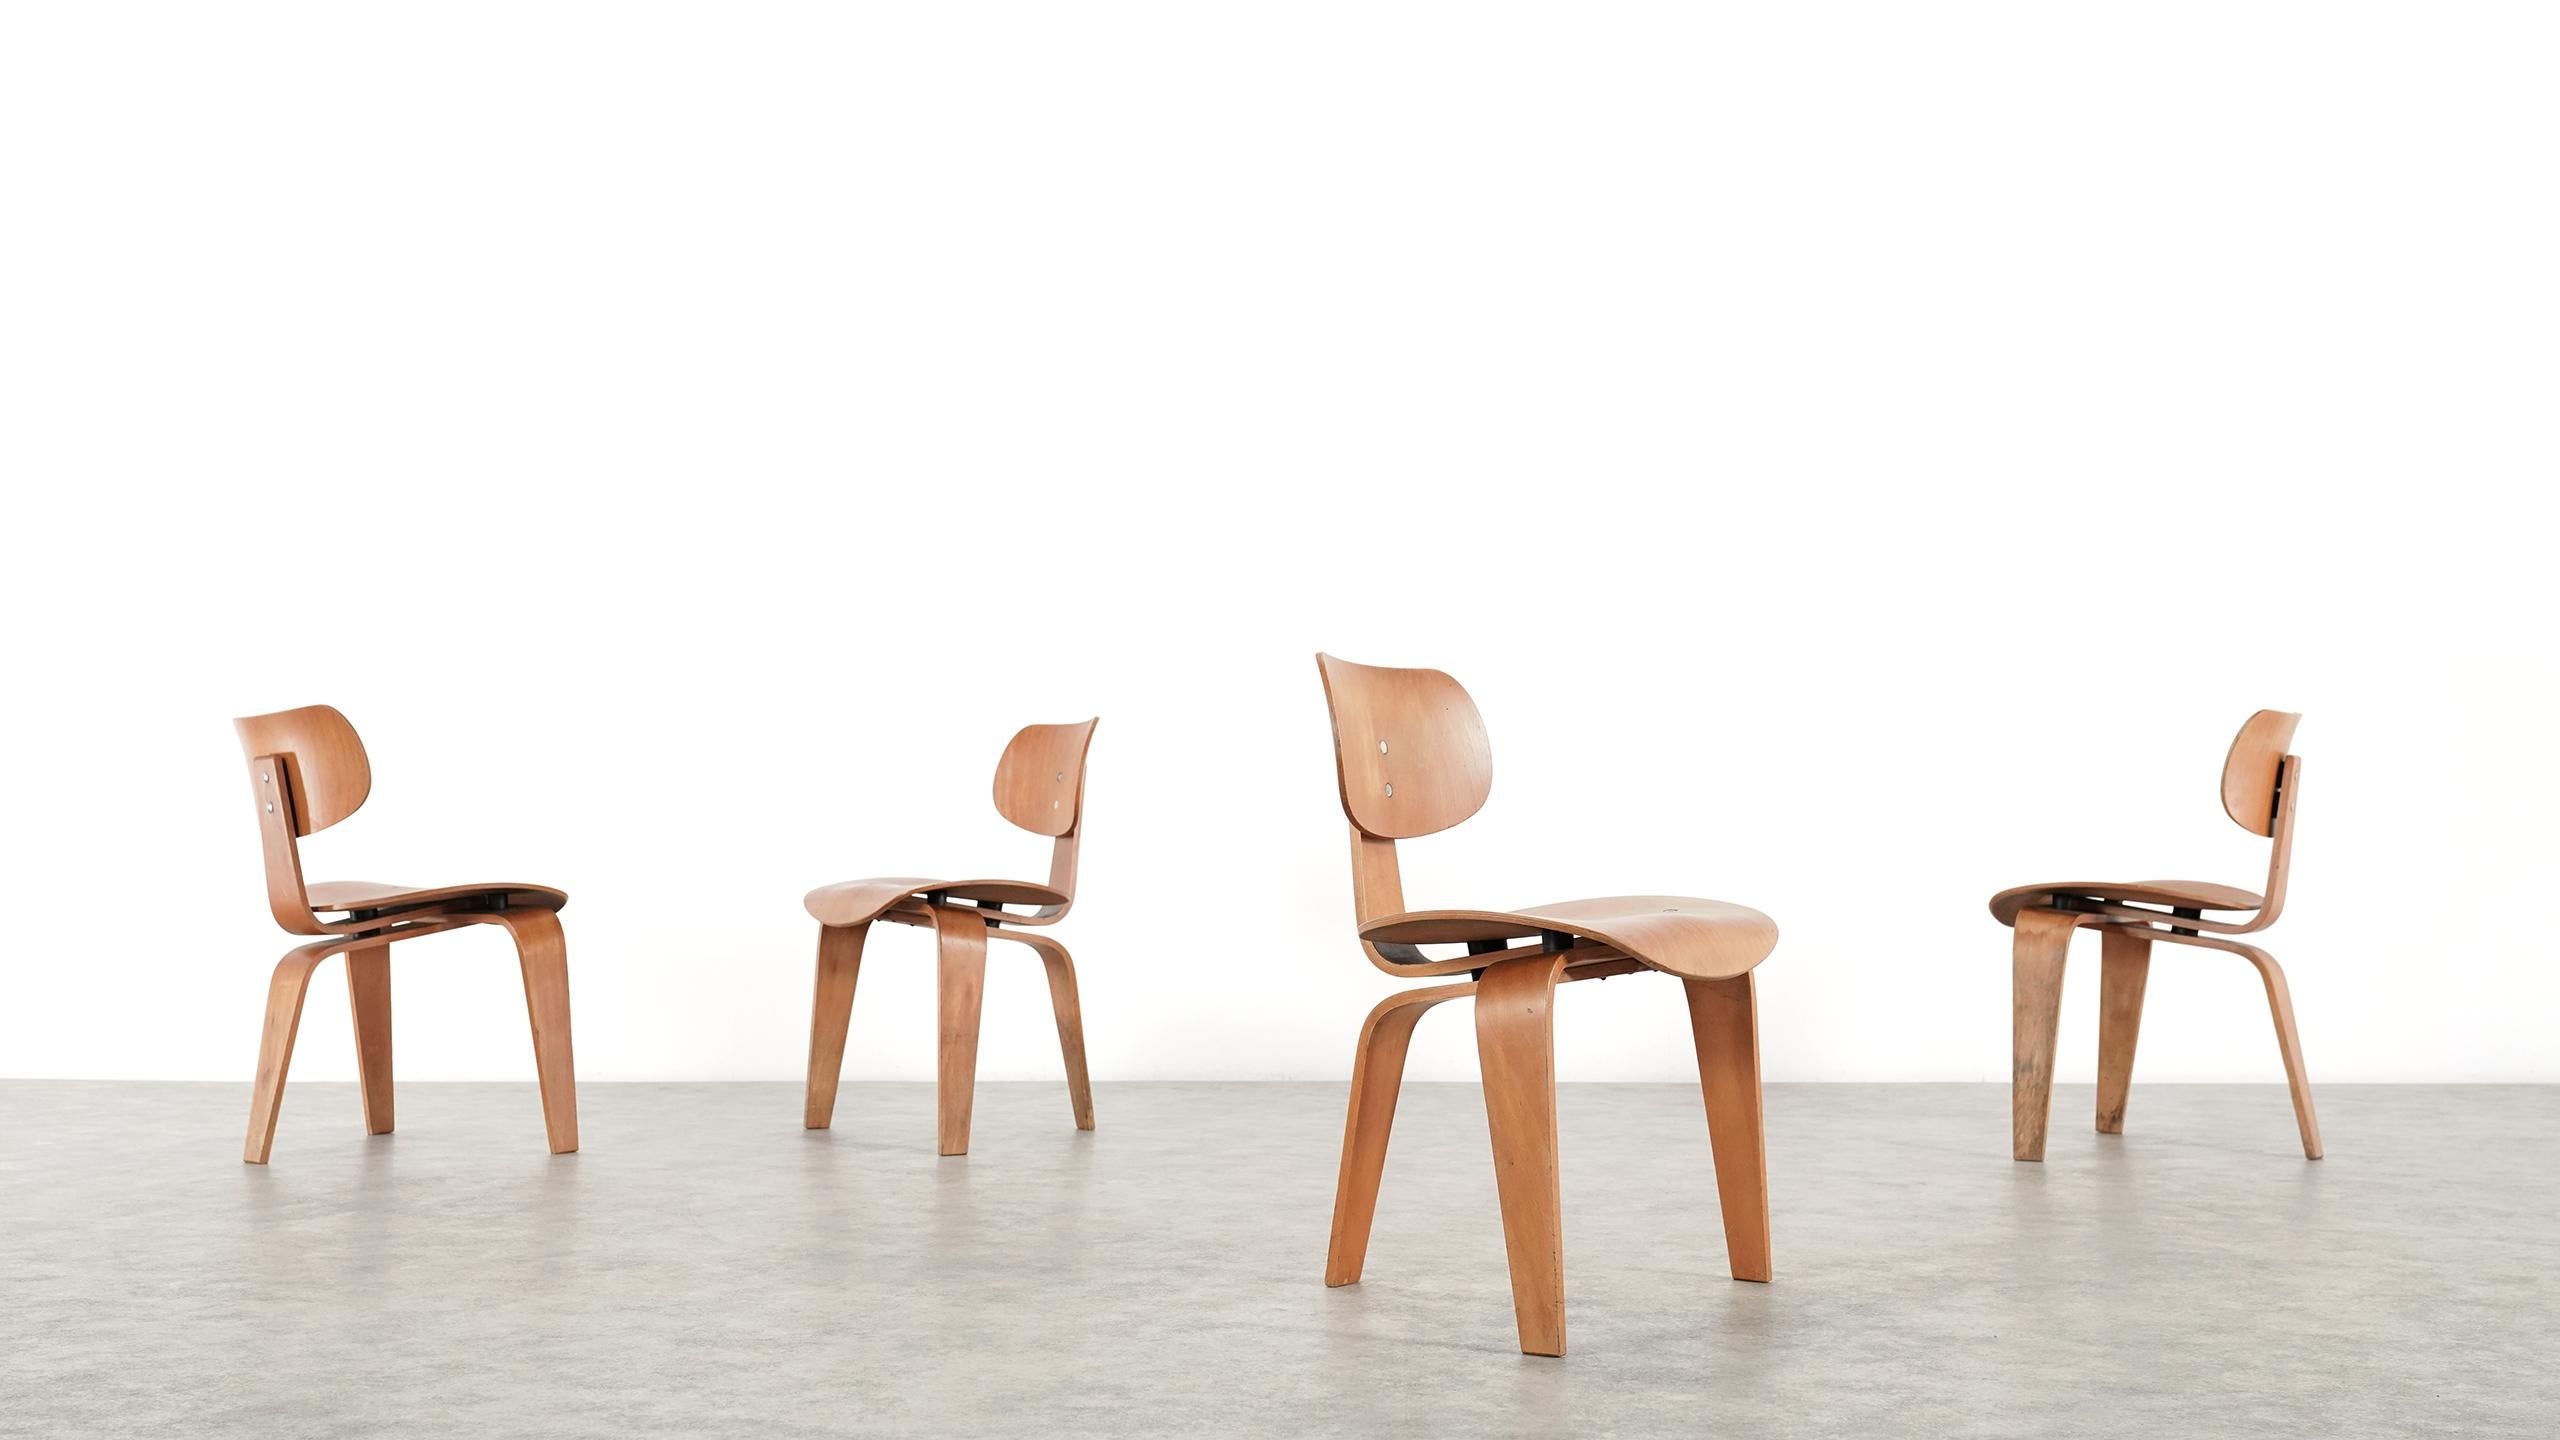 Set of 4 early examples of the SE42 Chair by Egon Eiermann, made out of plywood in beech. 

The curved seat and back promise a very comfortable seating. 

These chairs come in original condition, we carefully removed the old transparent varnish